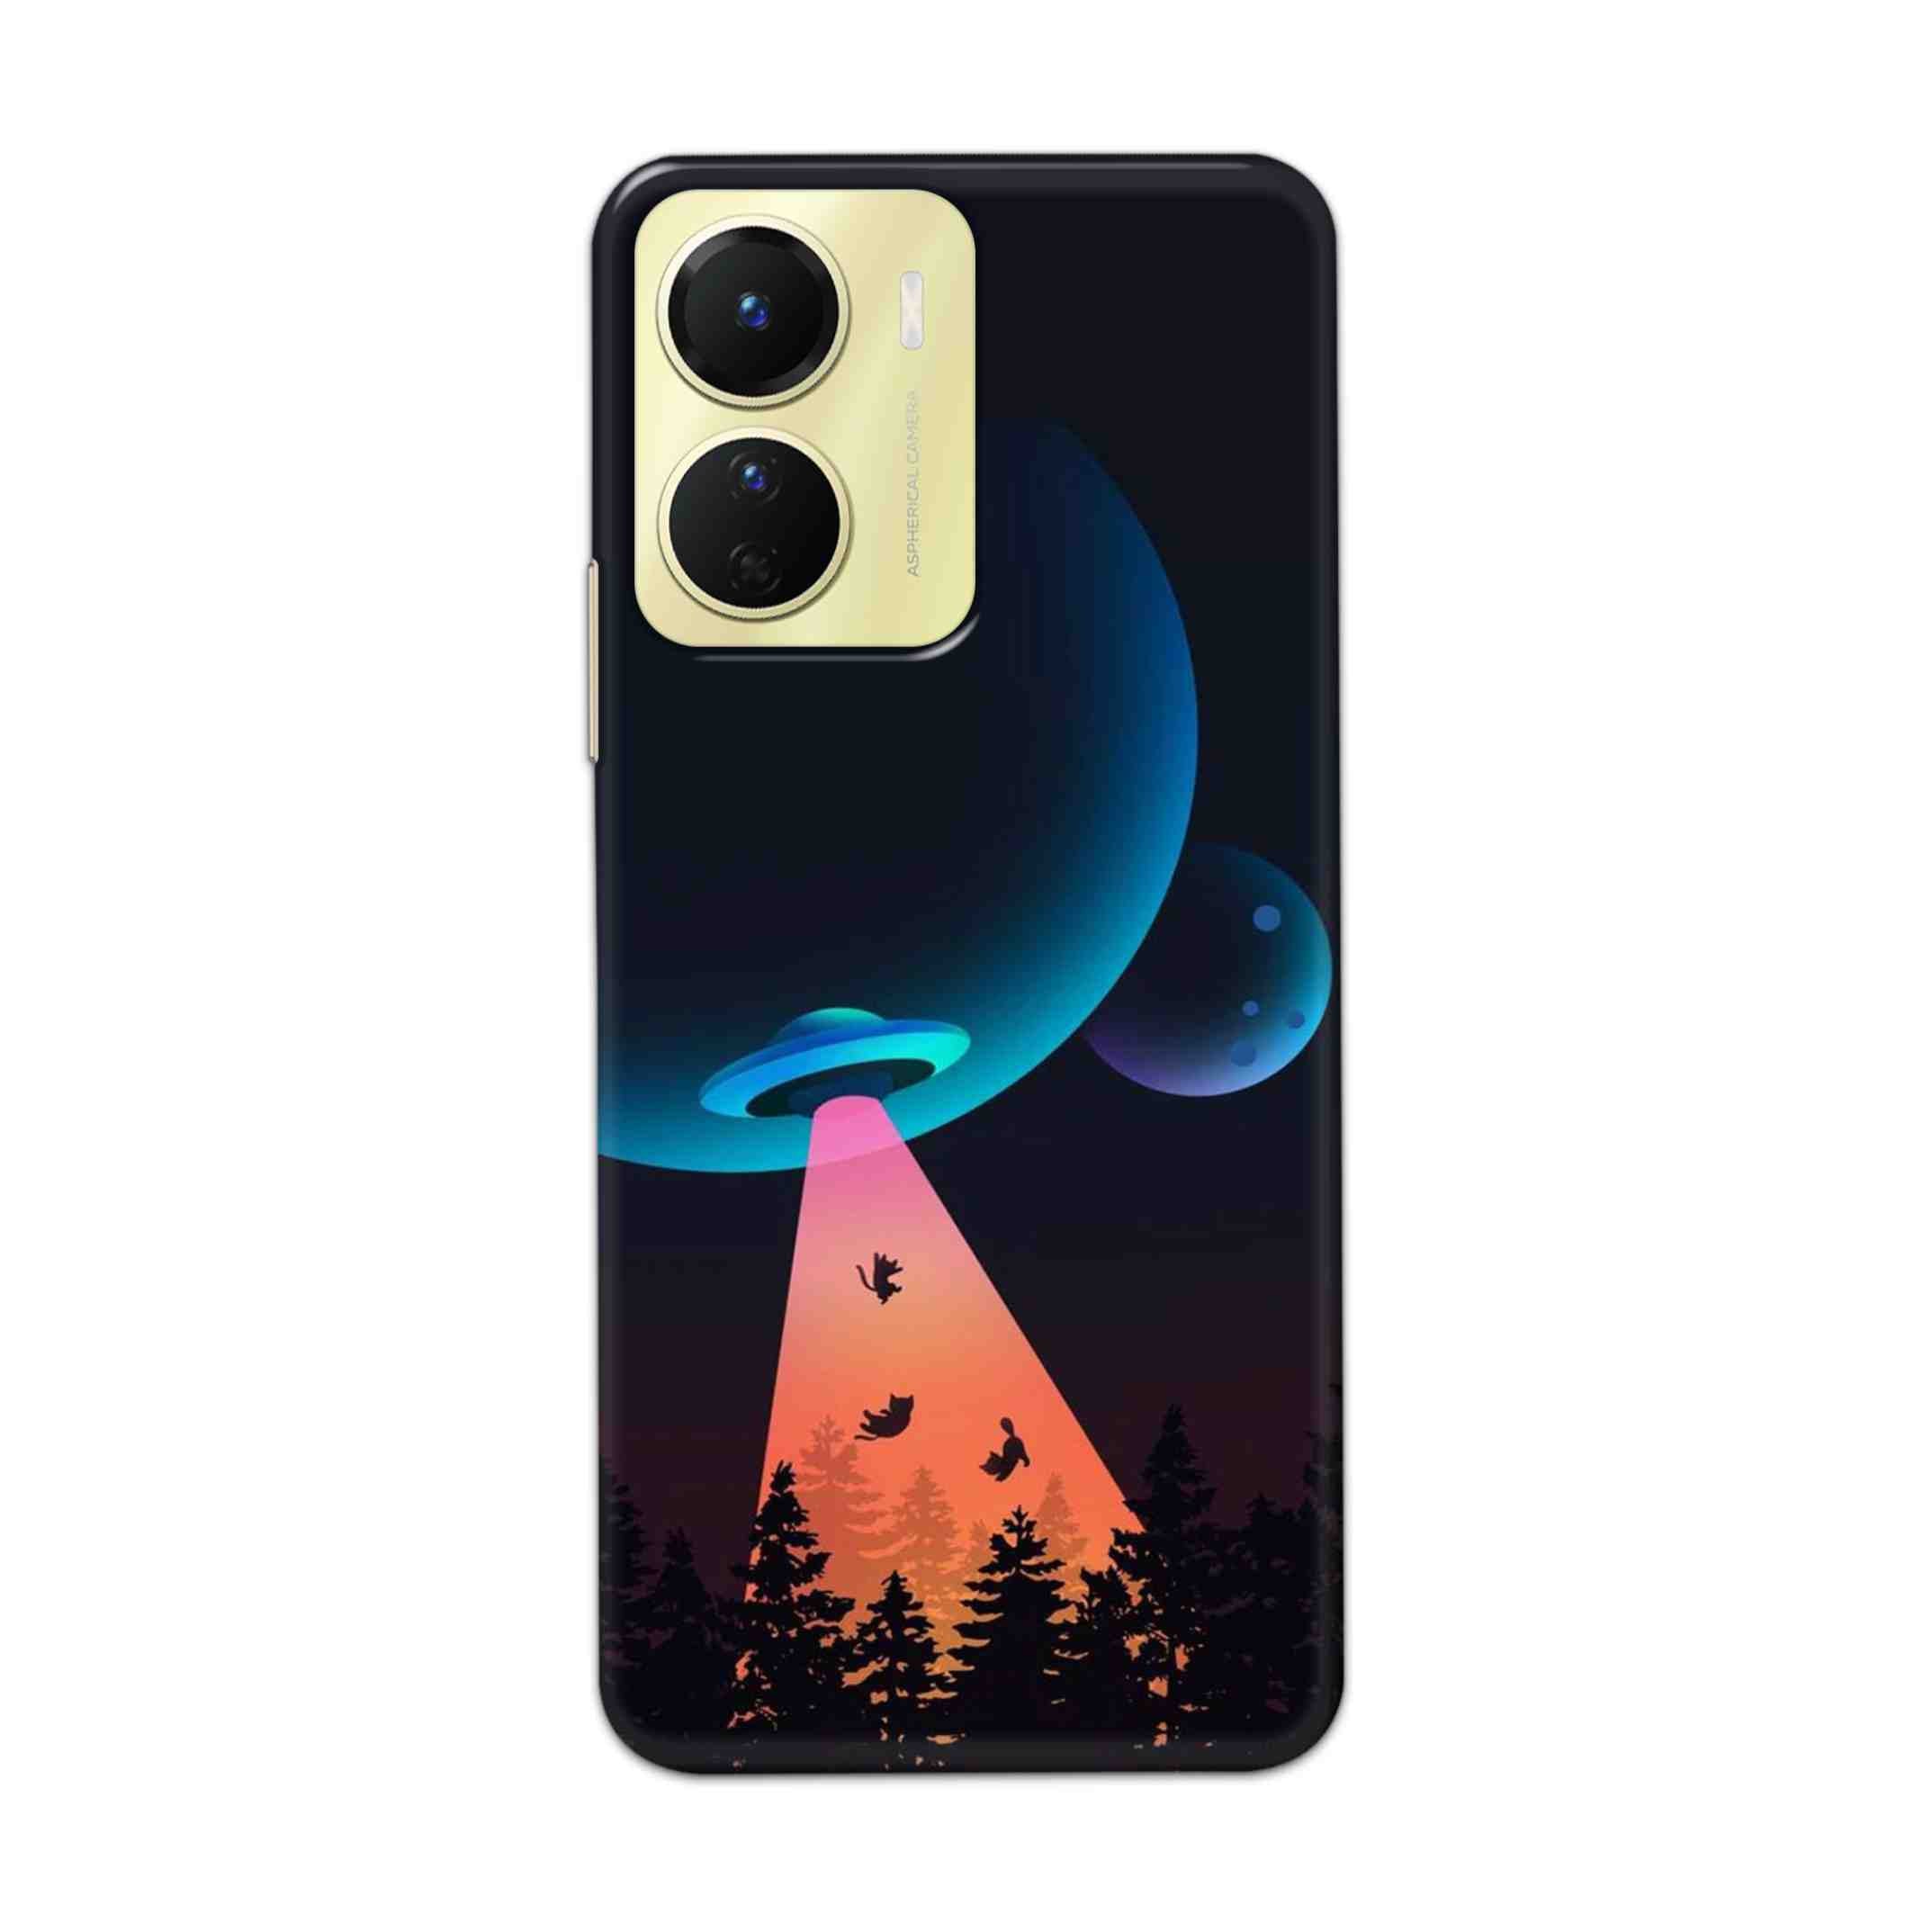 Buy Spaceship Hard Back Mobile Phone Case Cover For Vivo Y16 Online